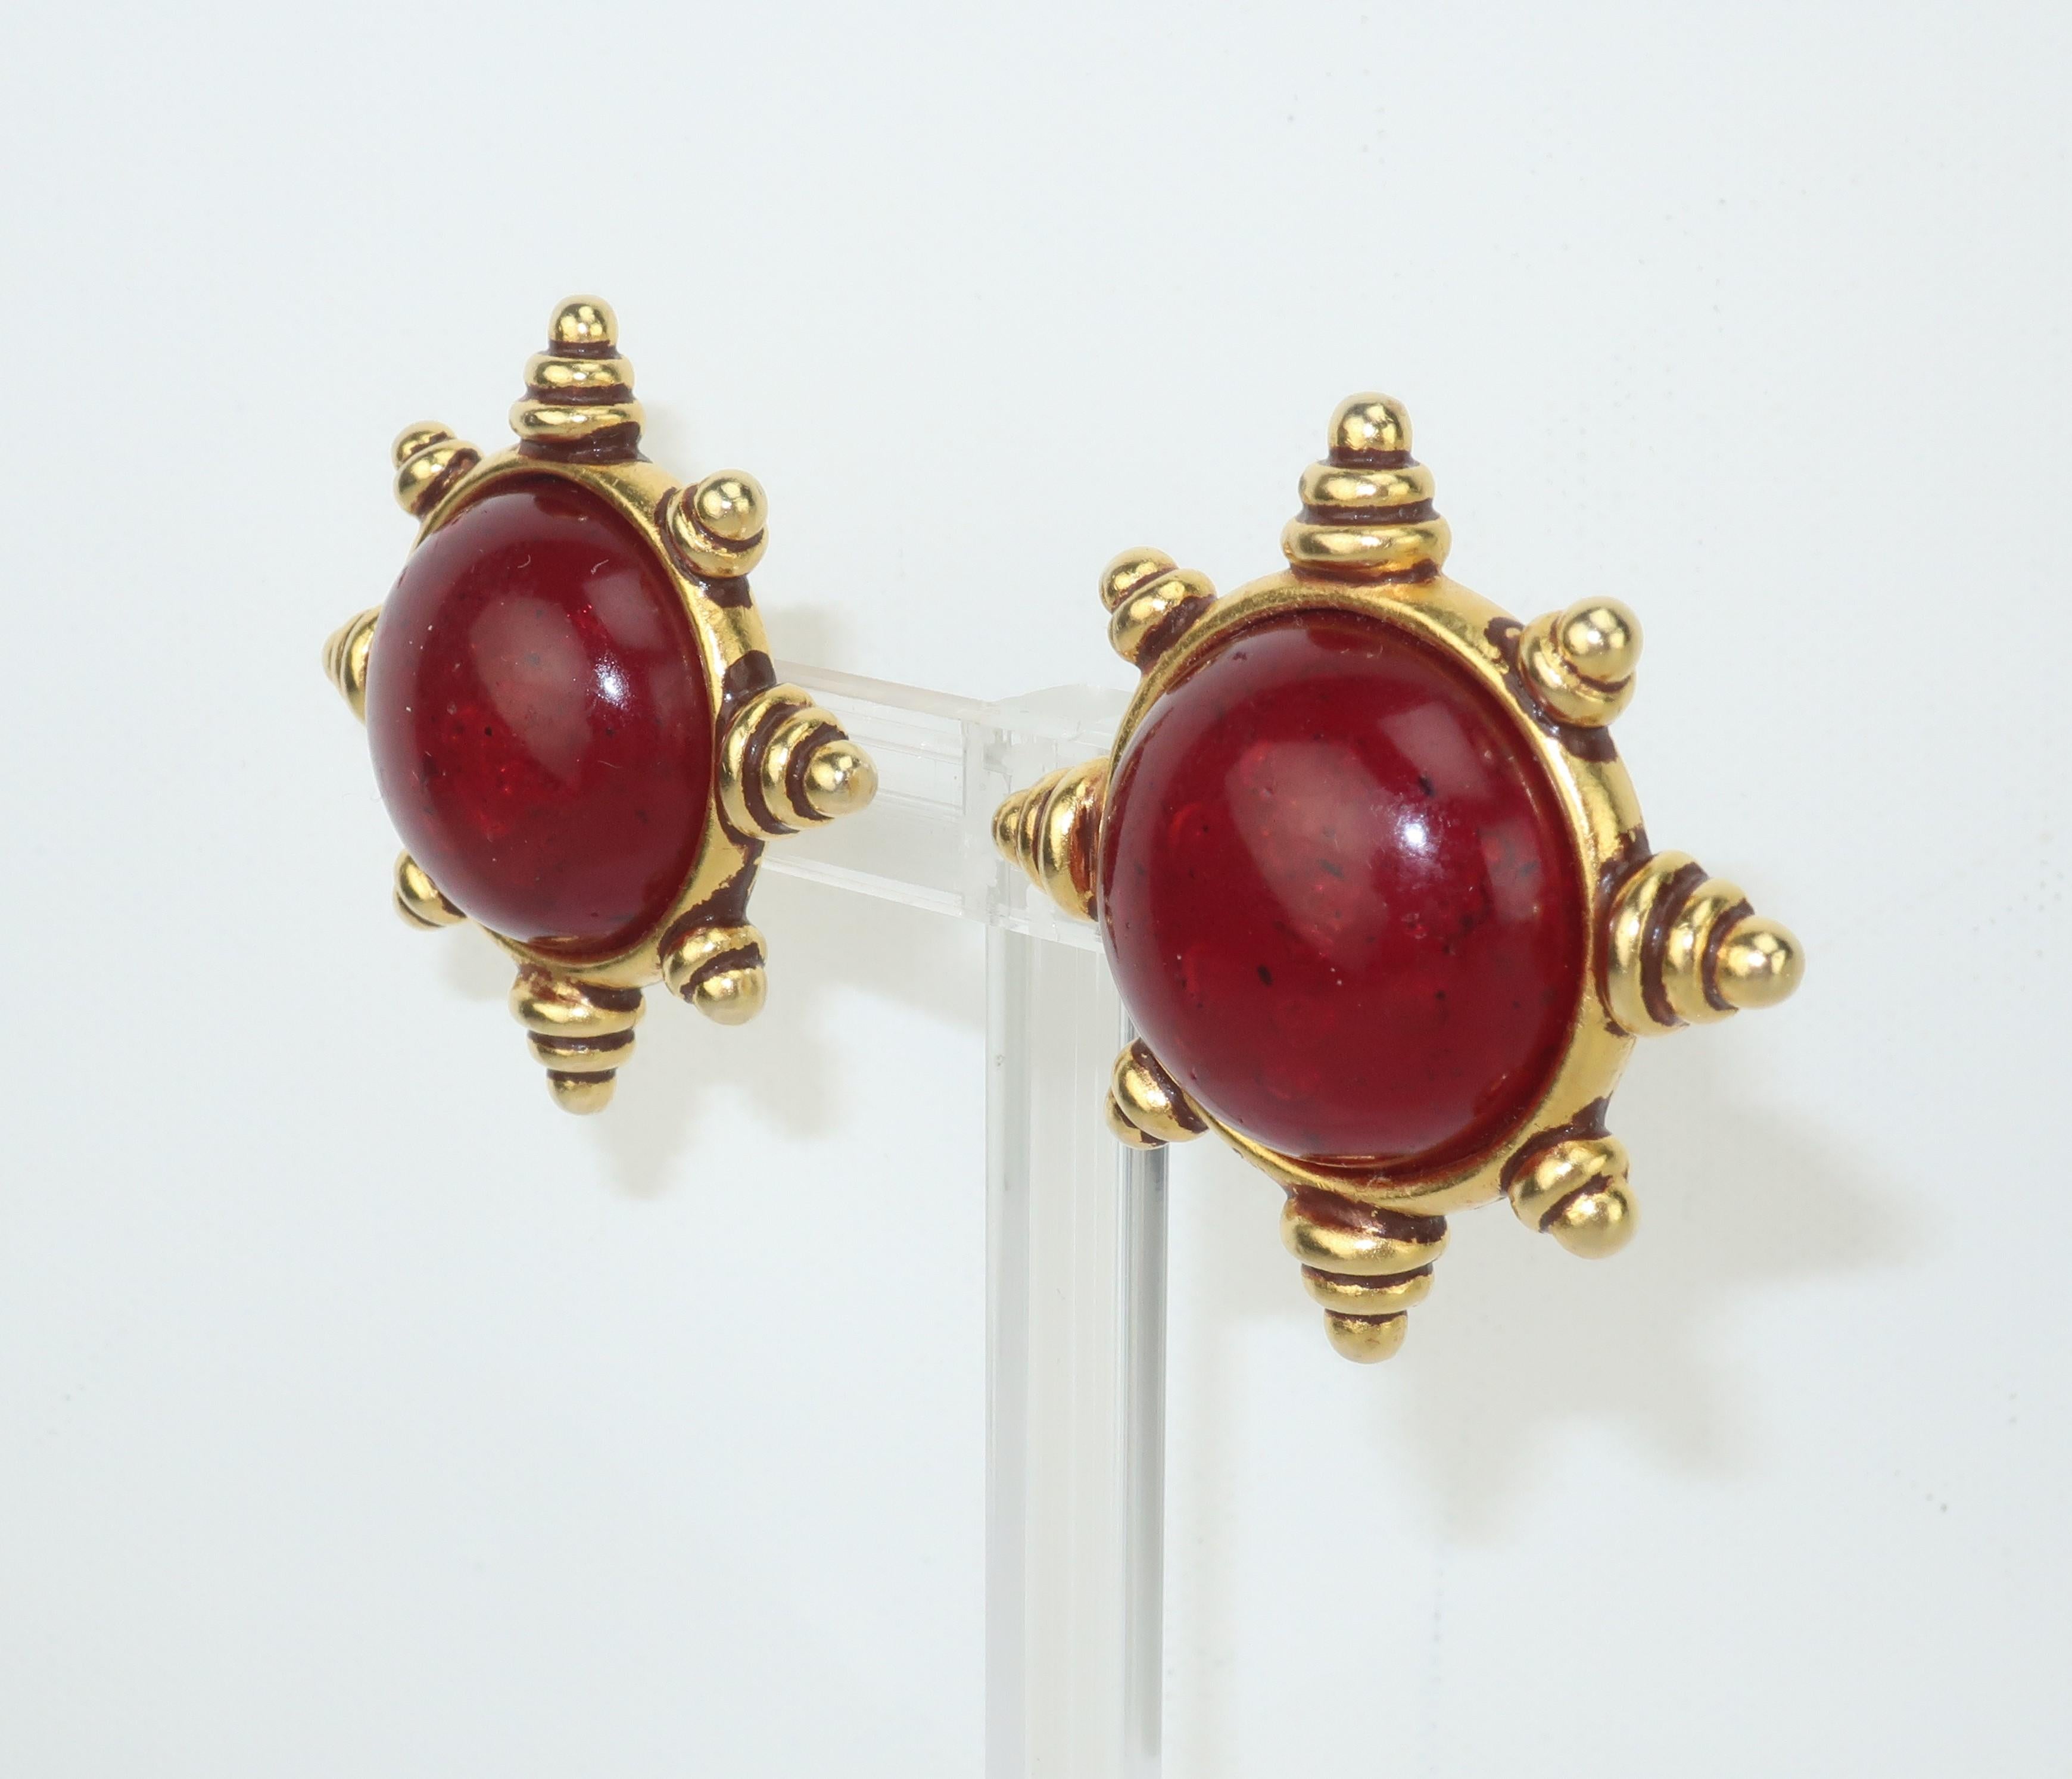 Deep cherry red and gold ... a stylish combination for these 1980's clip on earrings by Issac Manevitz for his jewelry line, Ben-Amun.  The Byzantine style gold tone setting is beautifully detailed and serves to frame a resin 'stone' which is